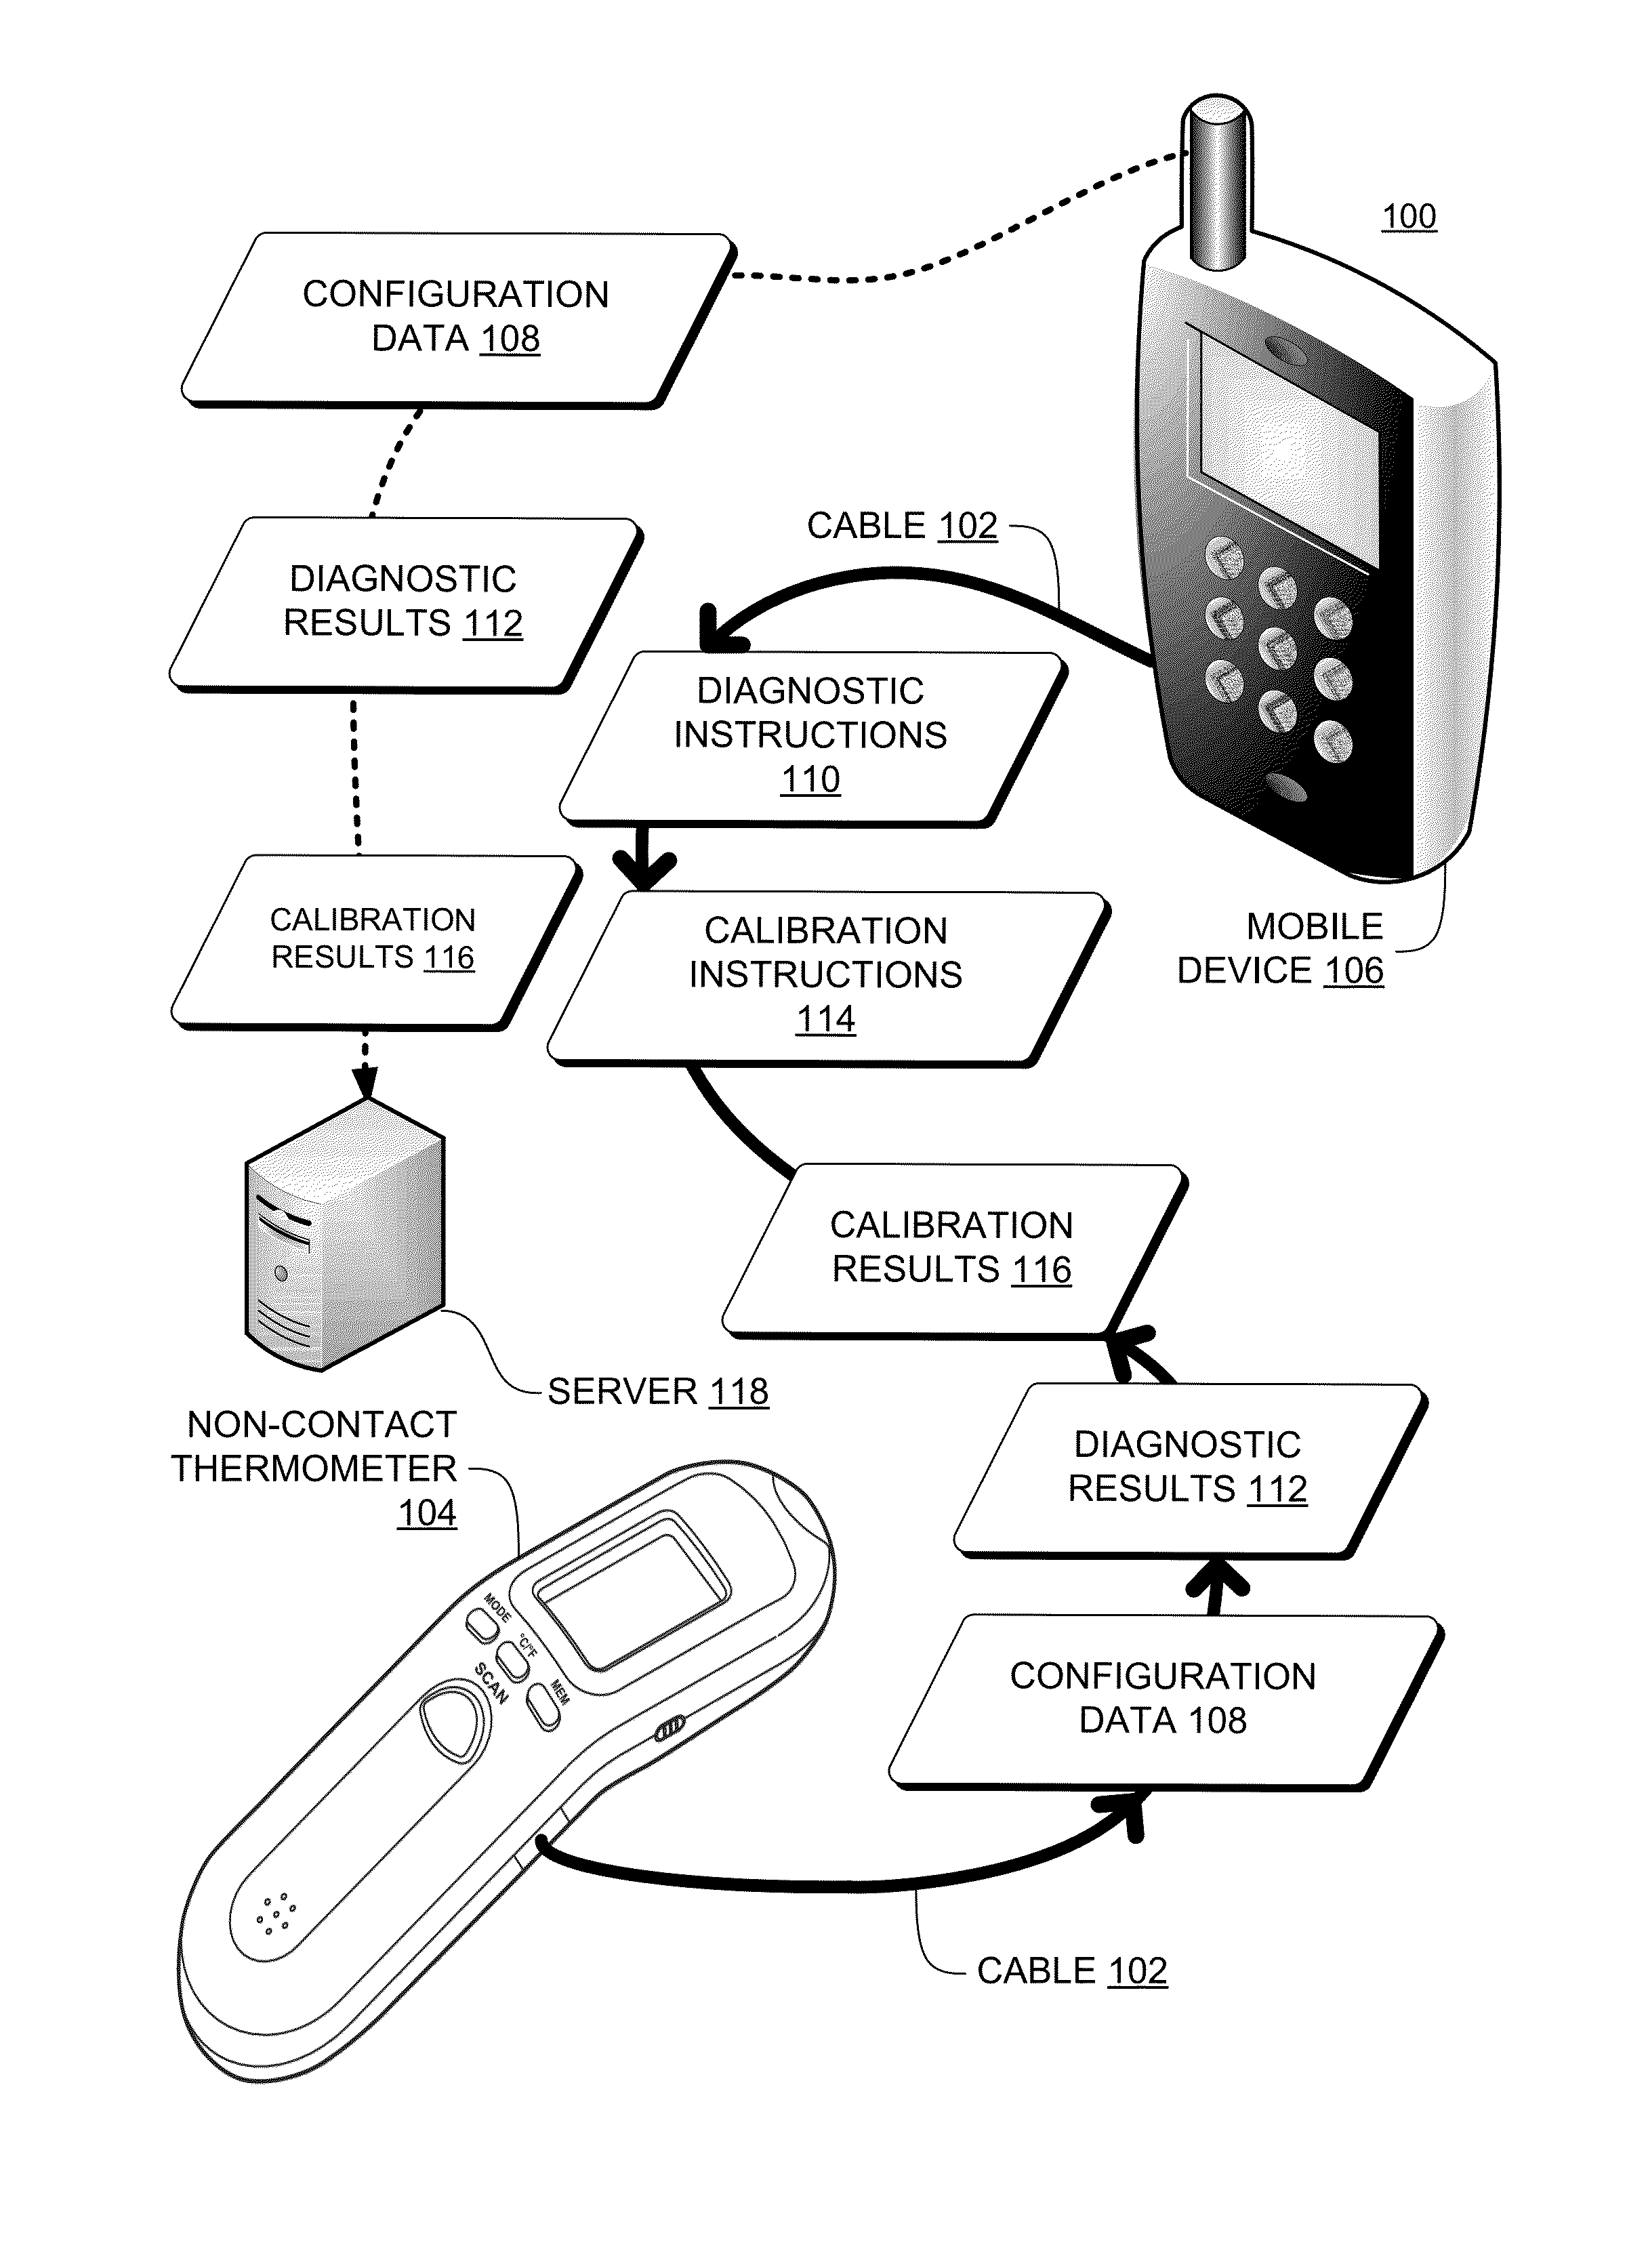 Calibration of a hand-held medical device by a mobile device